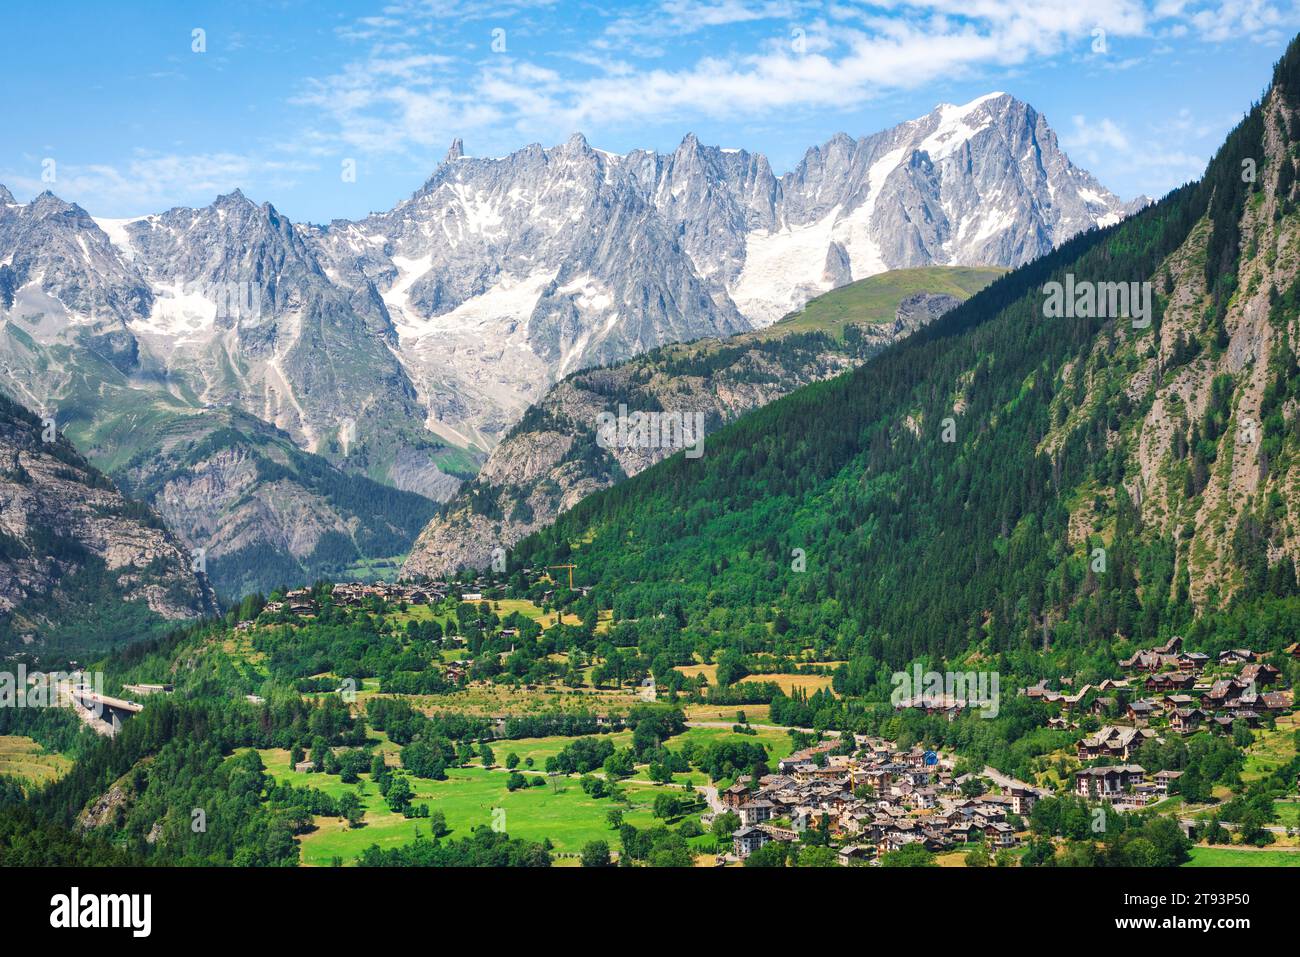 The Grandes Jorasses mountain and the giant's tooth, Mont Blanc massif. Palleusieux and Verrand villages. Pré Saint Didier, Aosta Valley, Italy Stock Photo